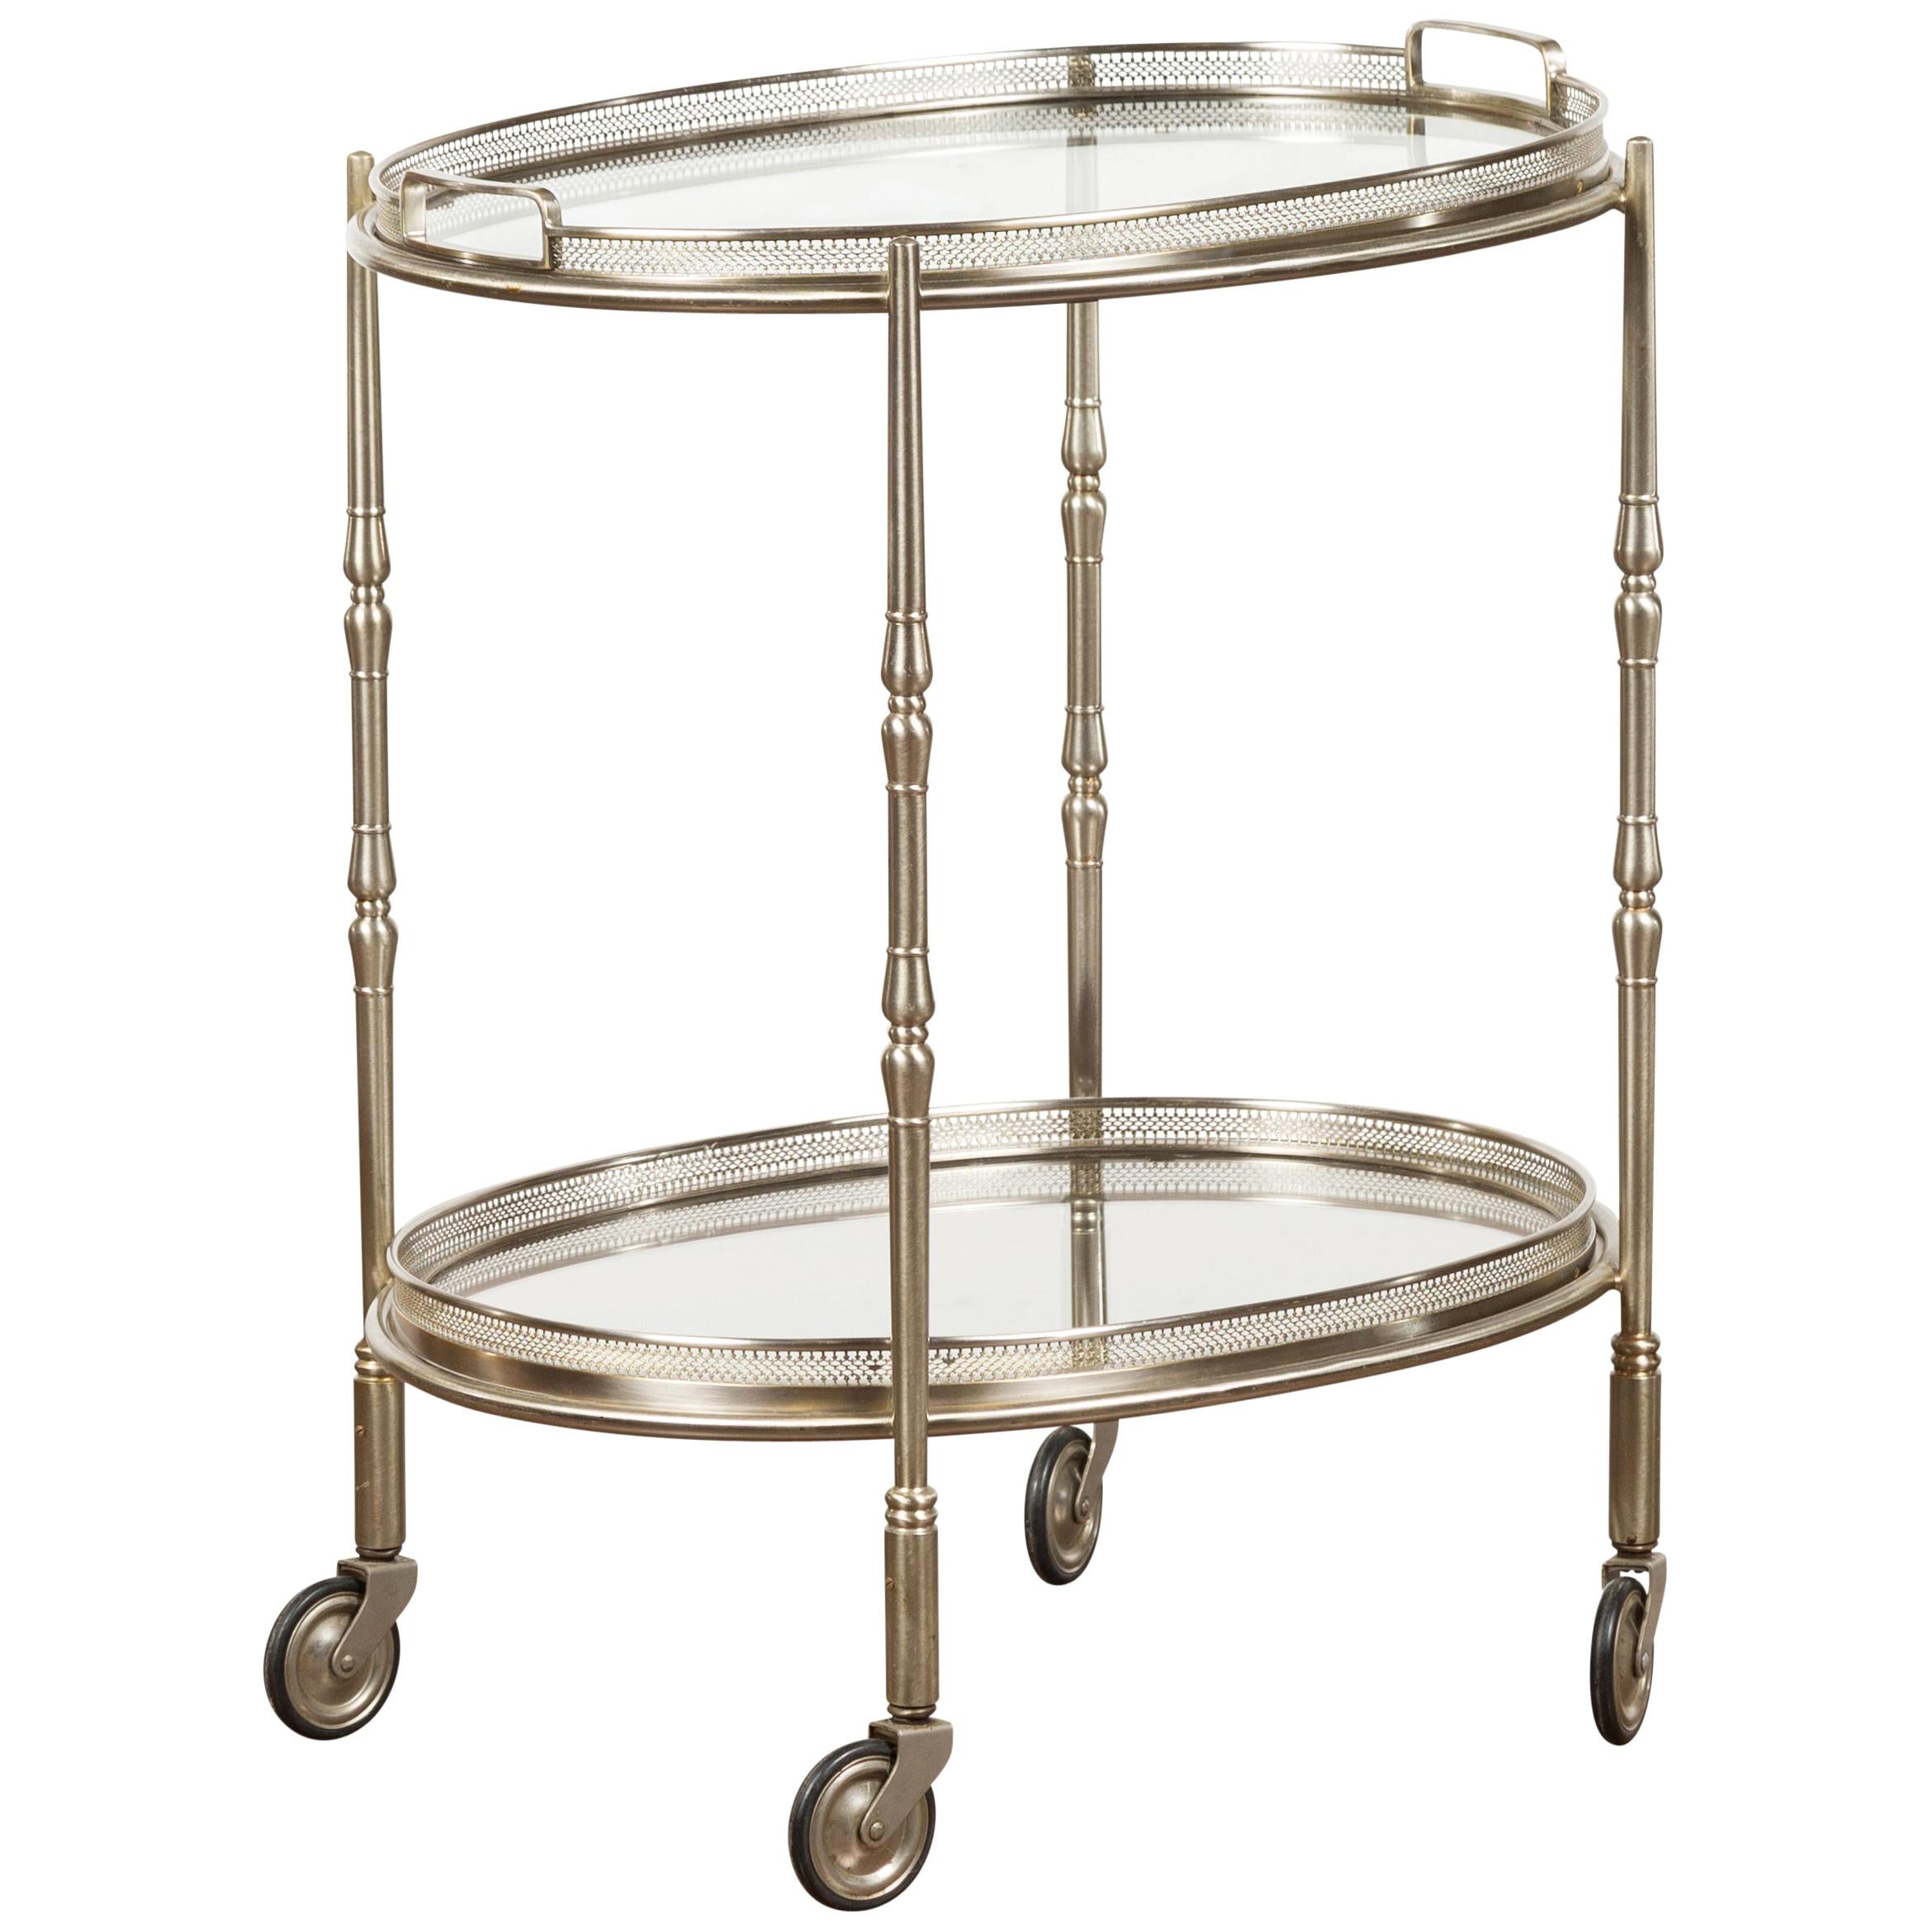 Italian Oval Midcentury Steel Trolley with Pierced Gallery and Mirrored Shelves